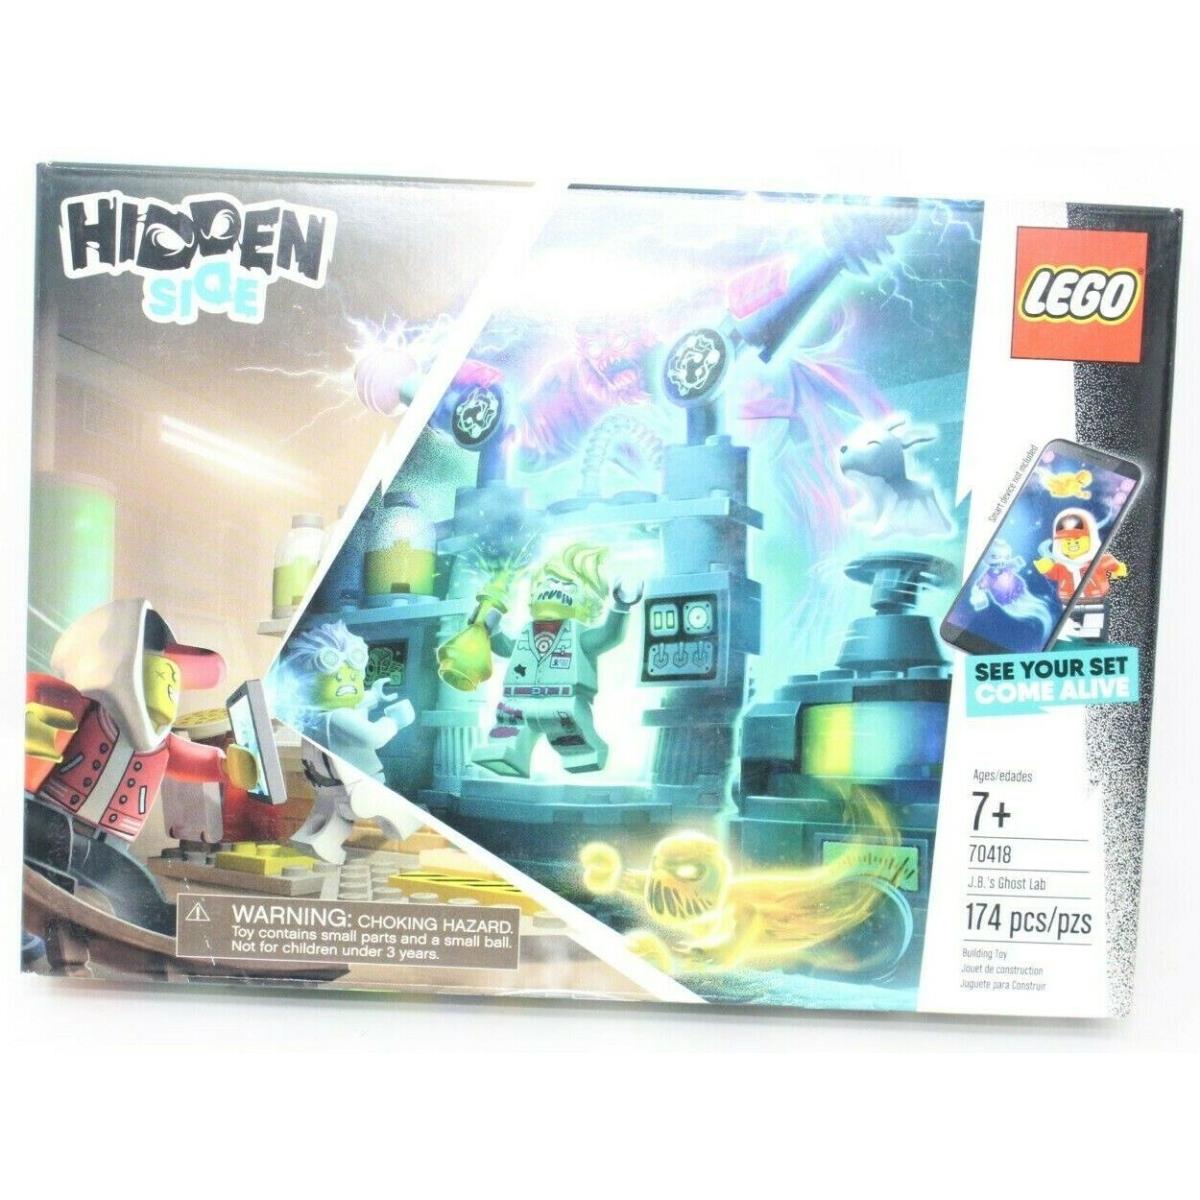 Lego Hidden Side Augmented Reality AR J.b.`s Ghost Lab 70418 174 Pieces